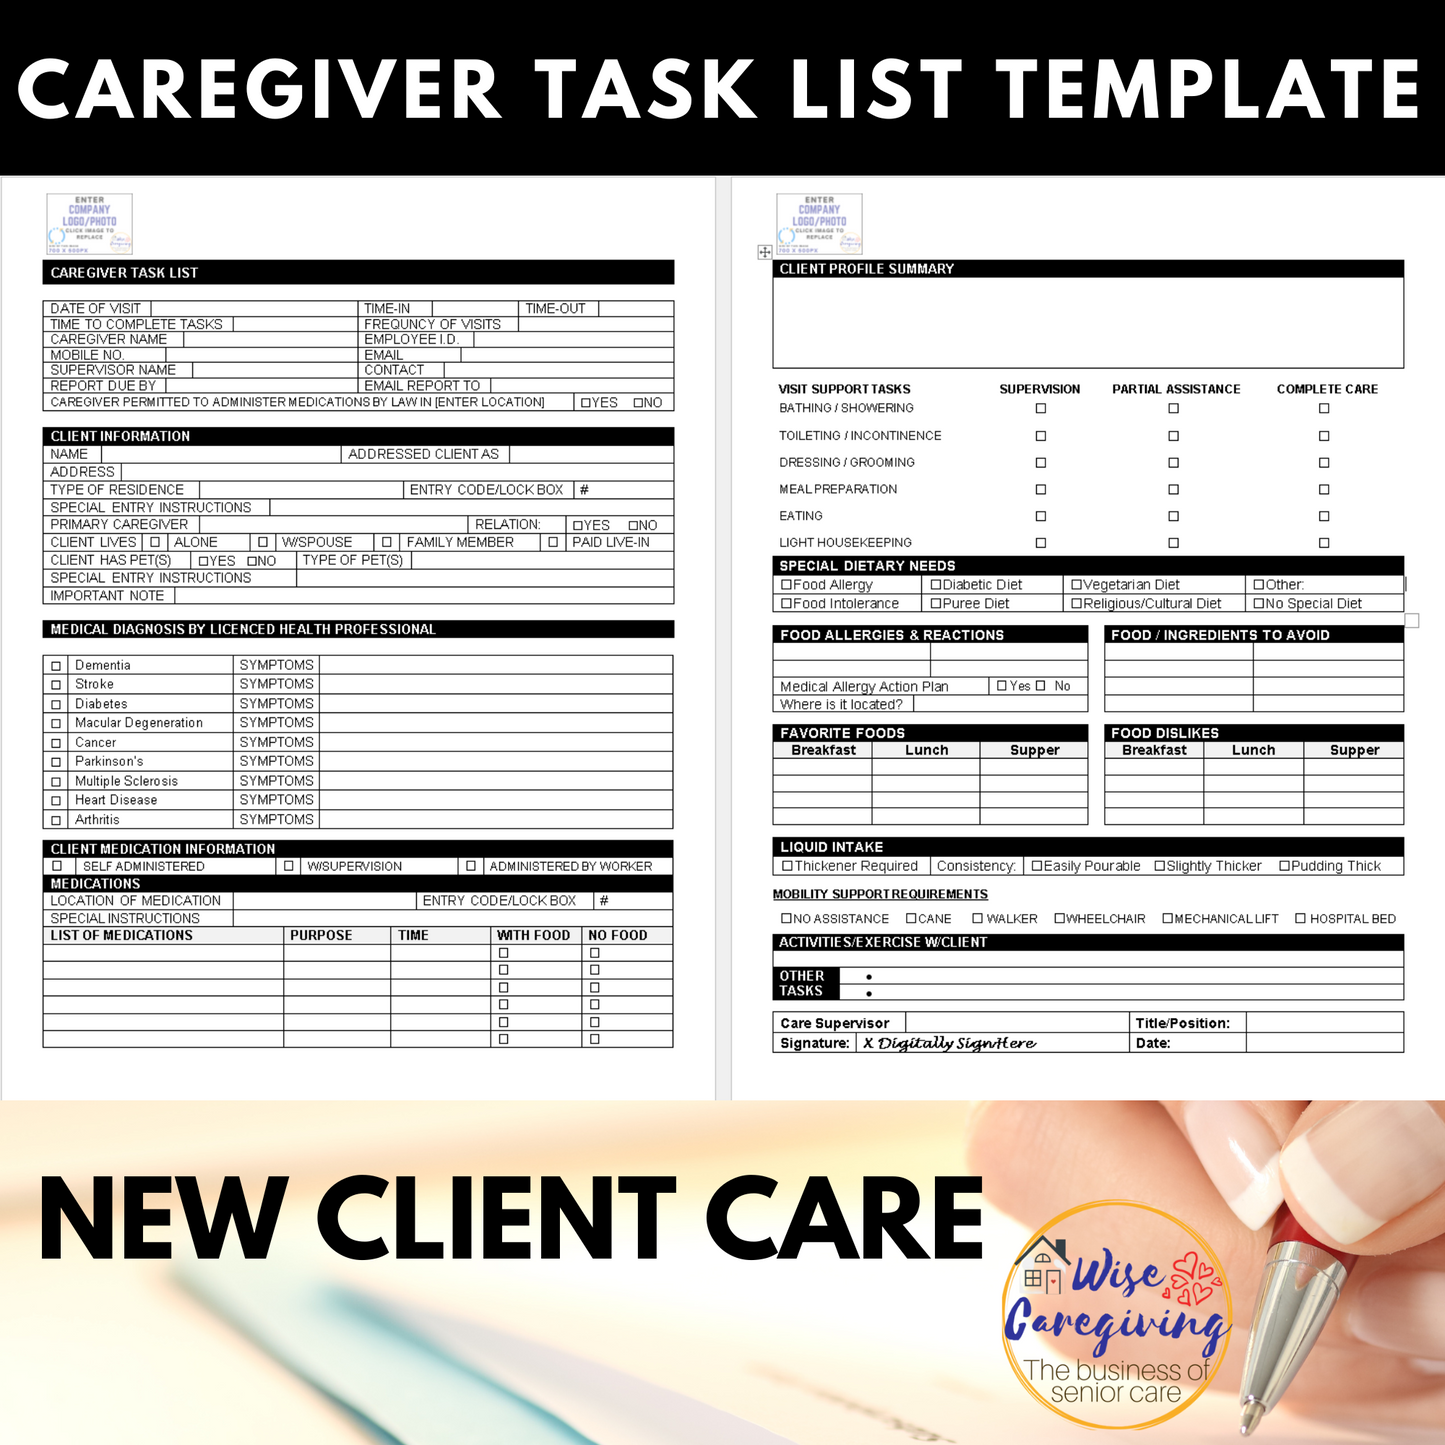 Caregiver Task List and Care Plan for New Home Care Clients